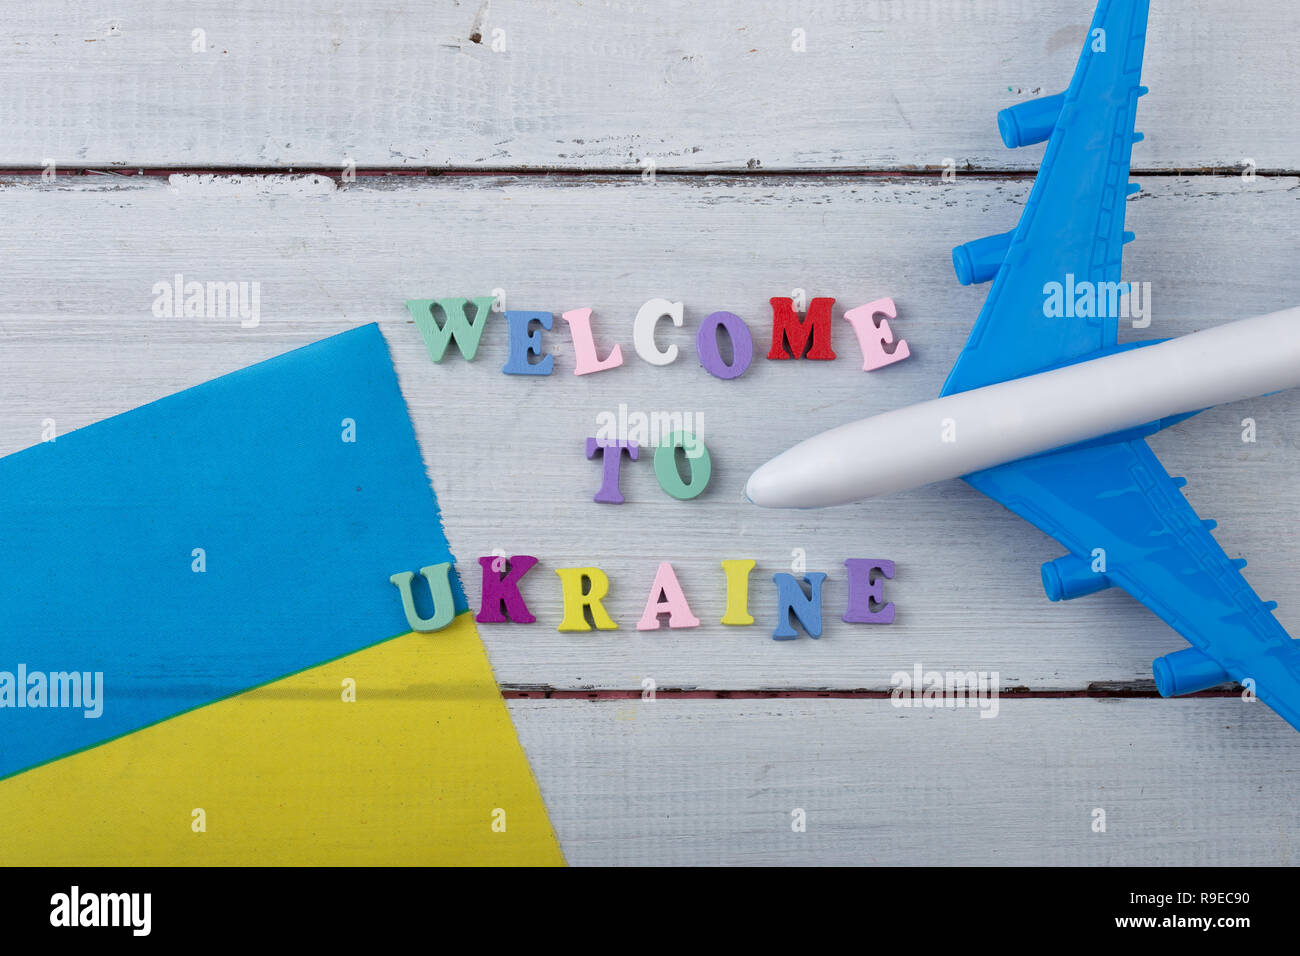 Travel time - colorful wooden letters with text 'Welcome to Ukraine' , flag of the Ukraine, airplane model, passport on white wooden background Stock Photo